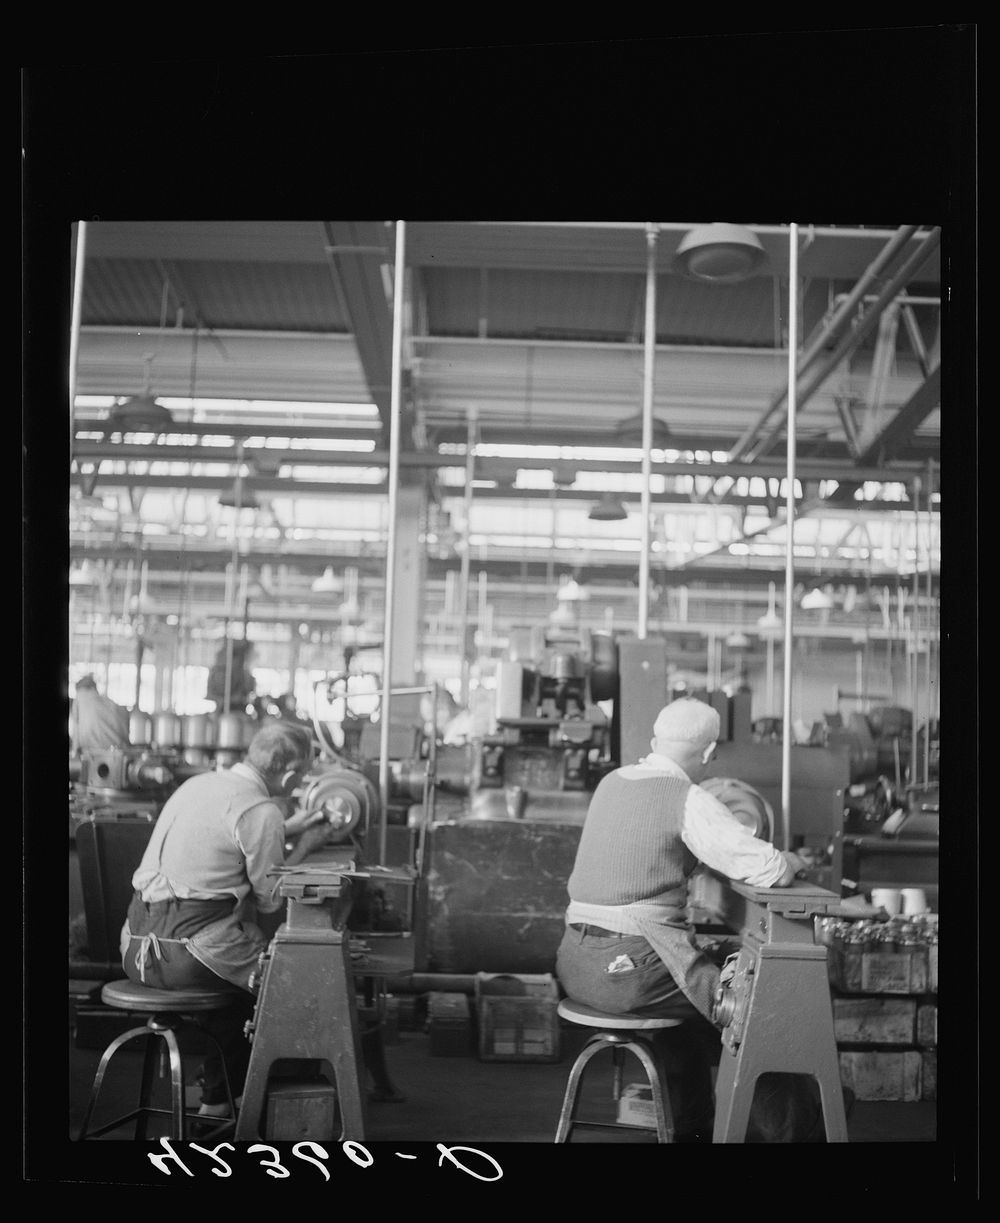 Old workmen at Hamilton Standard Propeller Corporation. East Hartford, Connecticut. Sourced from the Library of Congress.